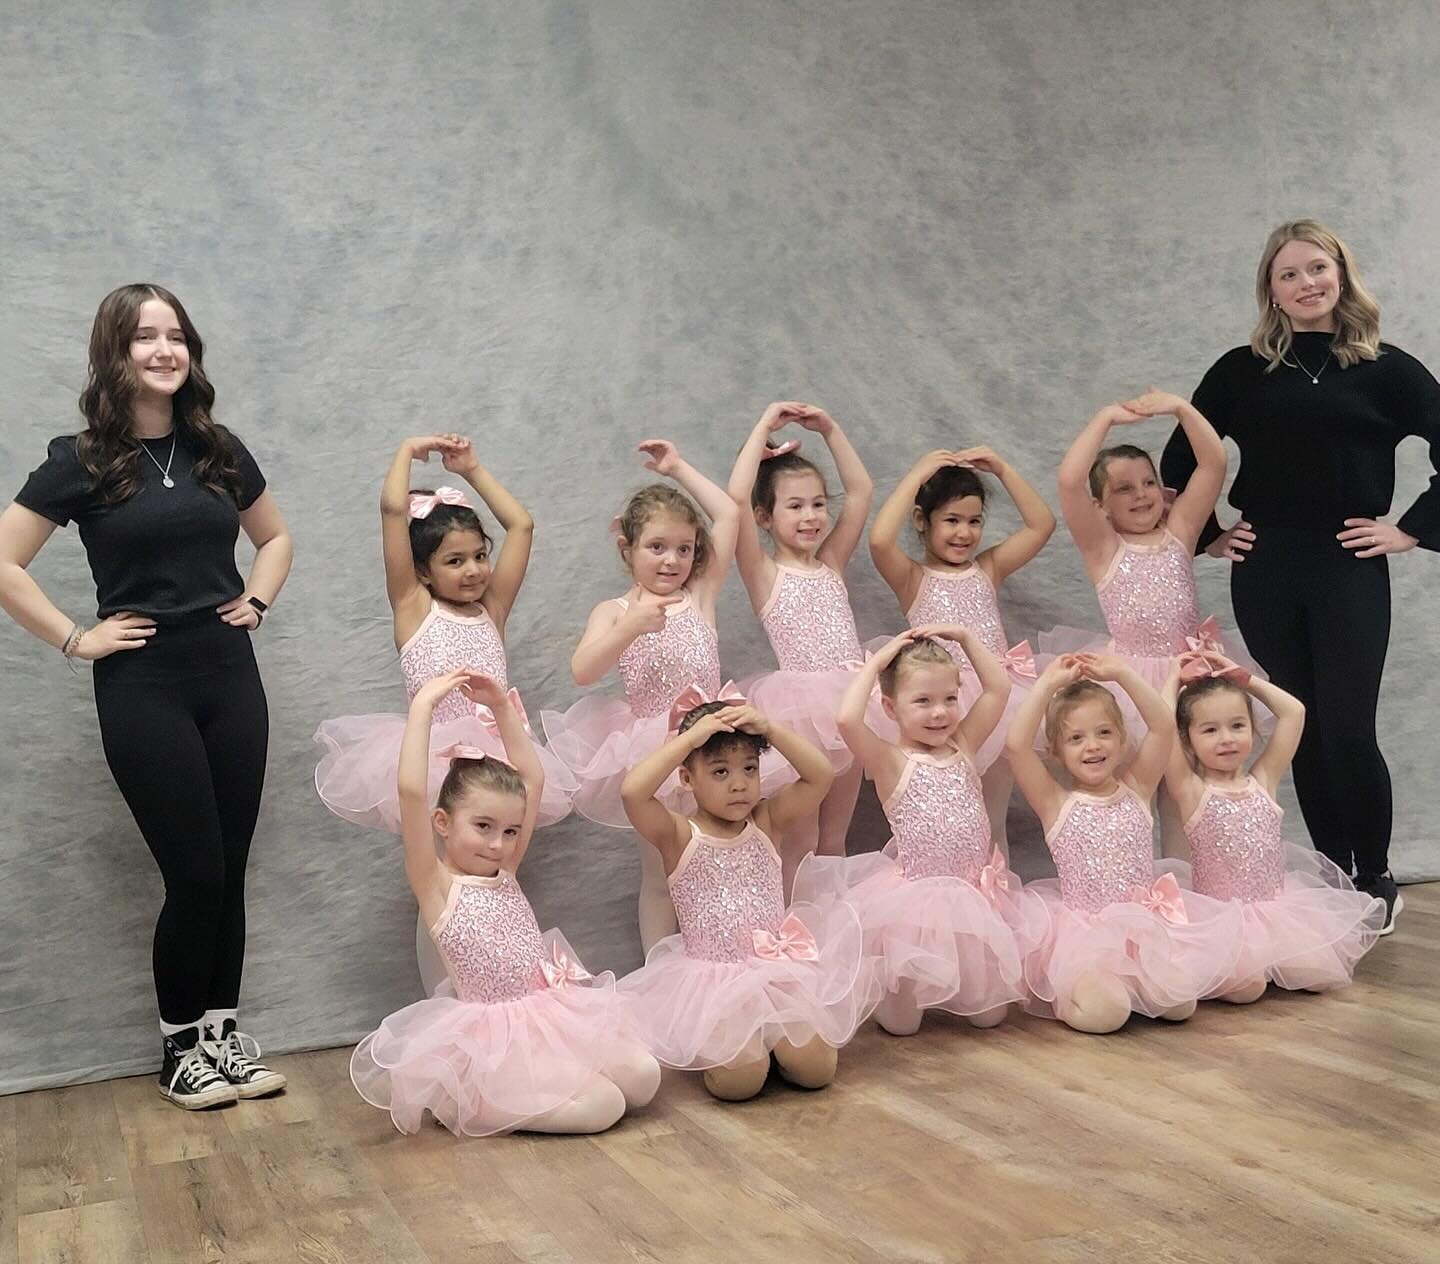 Final day of Picture Week 💙
This week always brings excitement about the upcoming recital&hellip; less than 2 months to go!

A huge shoutout to dance moms/dads/caregivers who got the dancers ready this week. Thank YOU for getting your dancers pictur